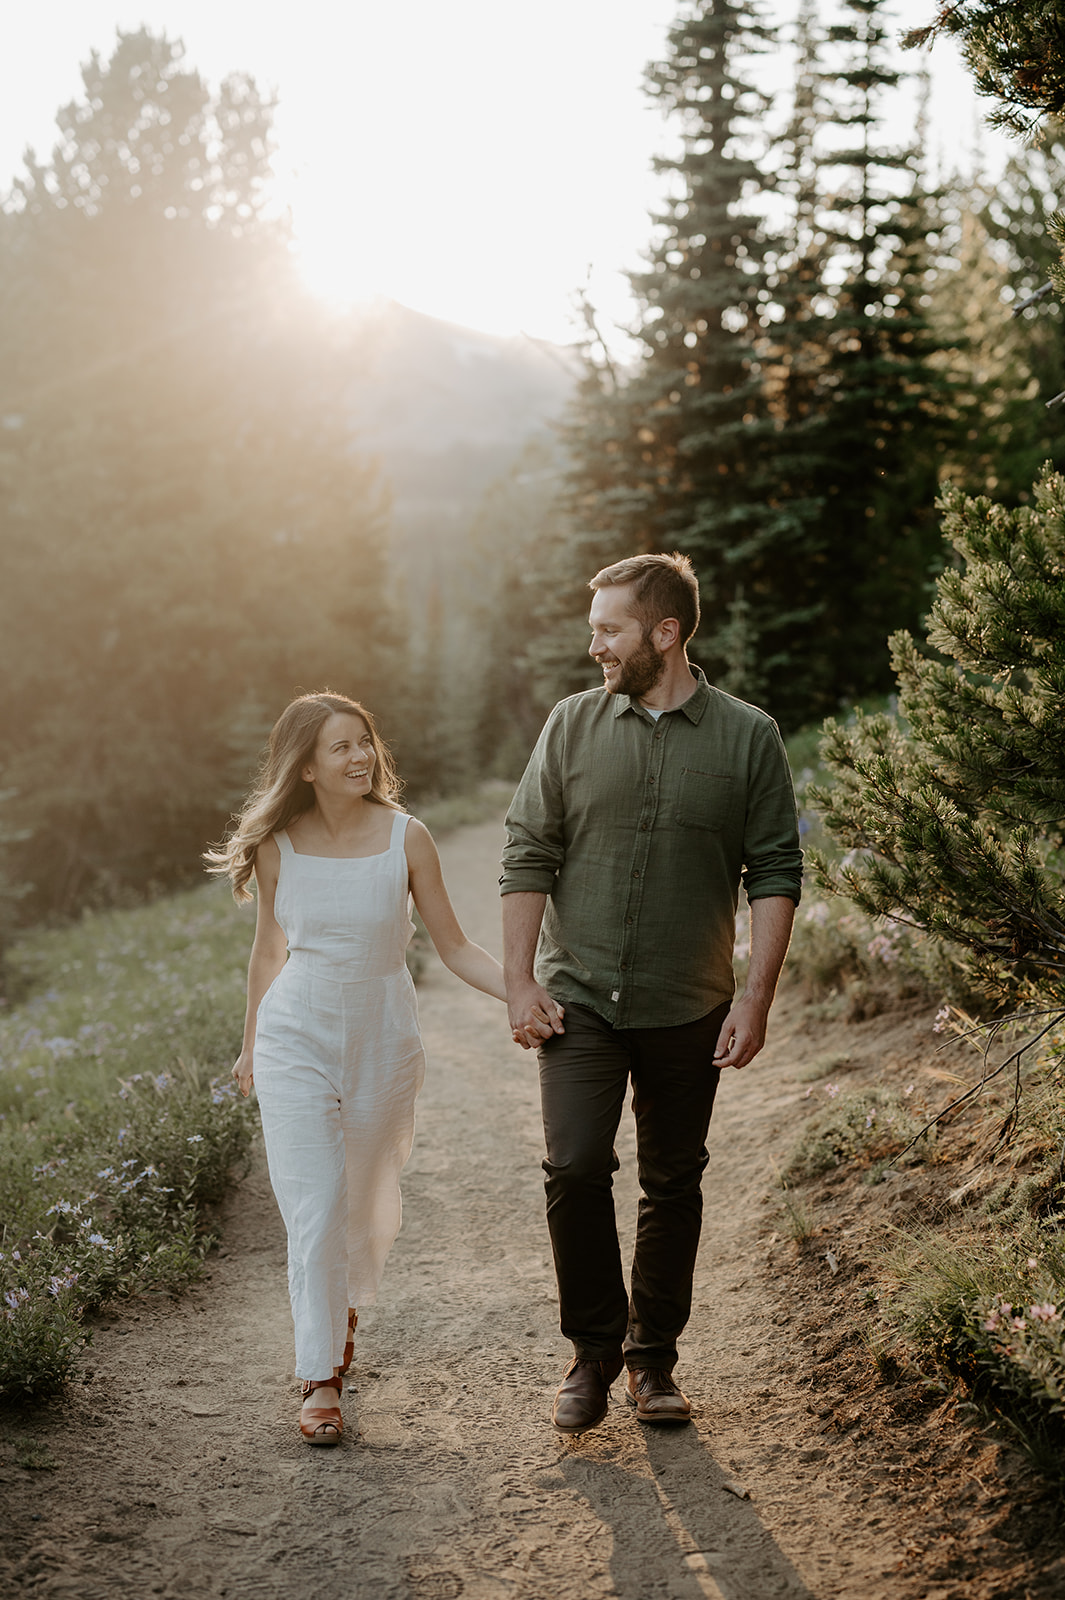 A couple walking hand in hand on a forest path, with the sun setting behind them.